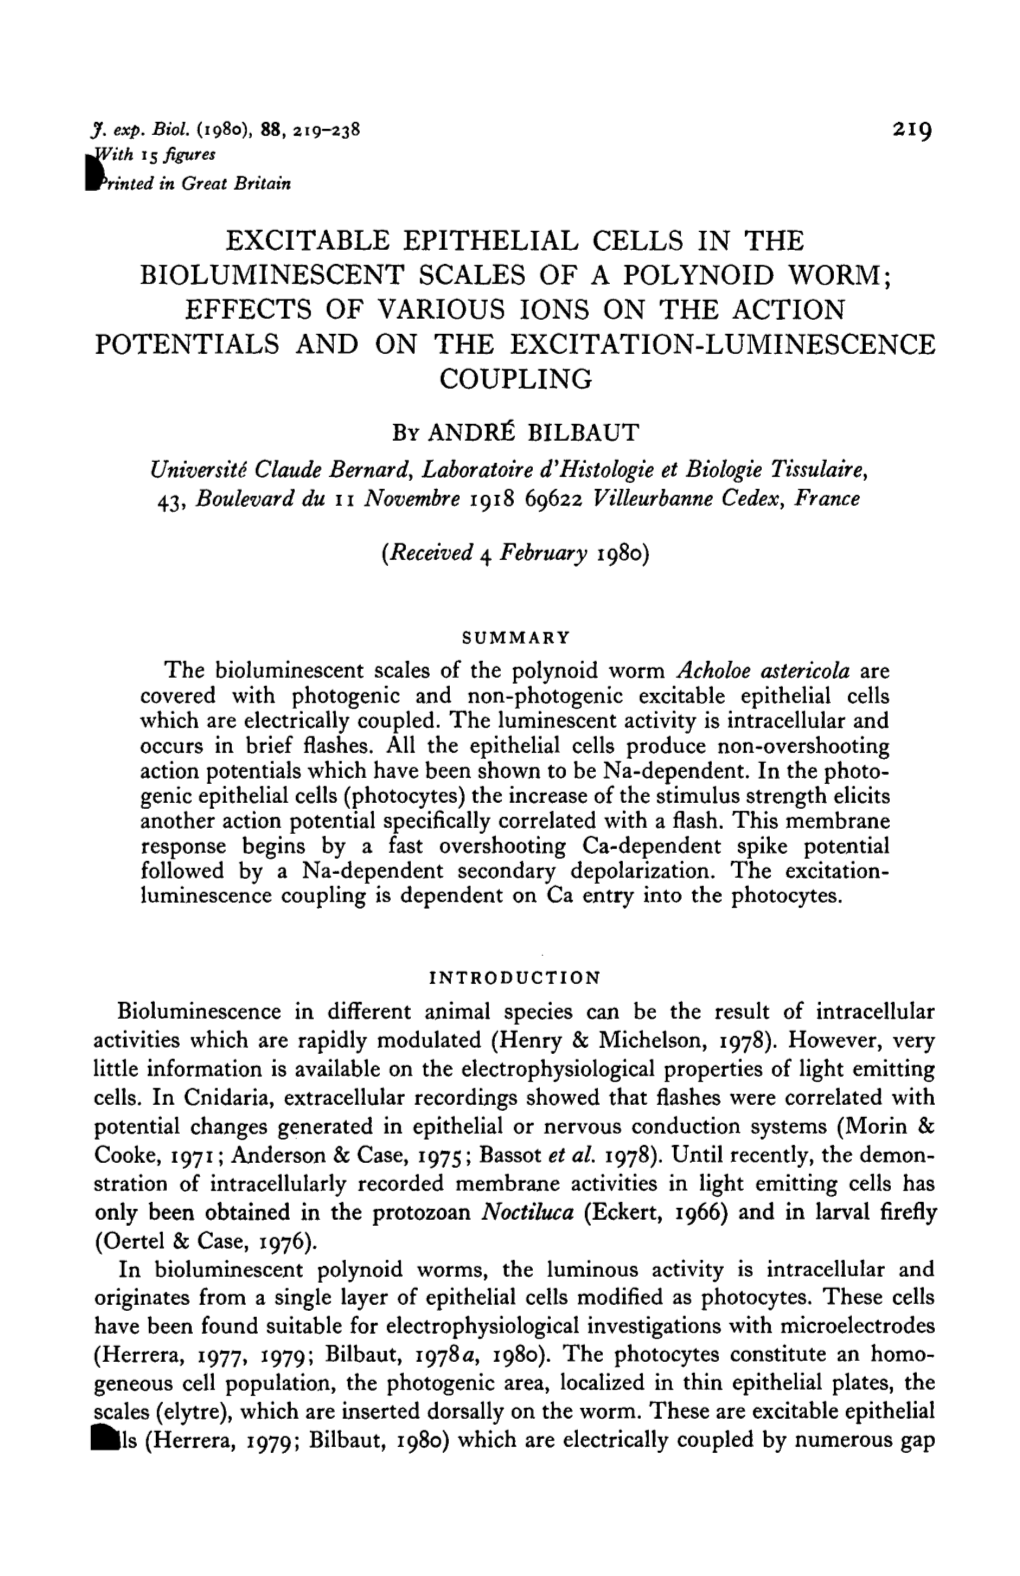 Effects of Various Ions on the Action Potentials and on the Excitation-Luminescence Coupling